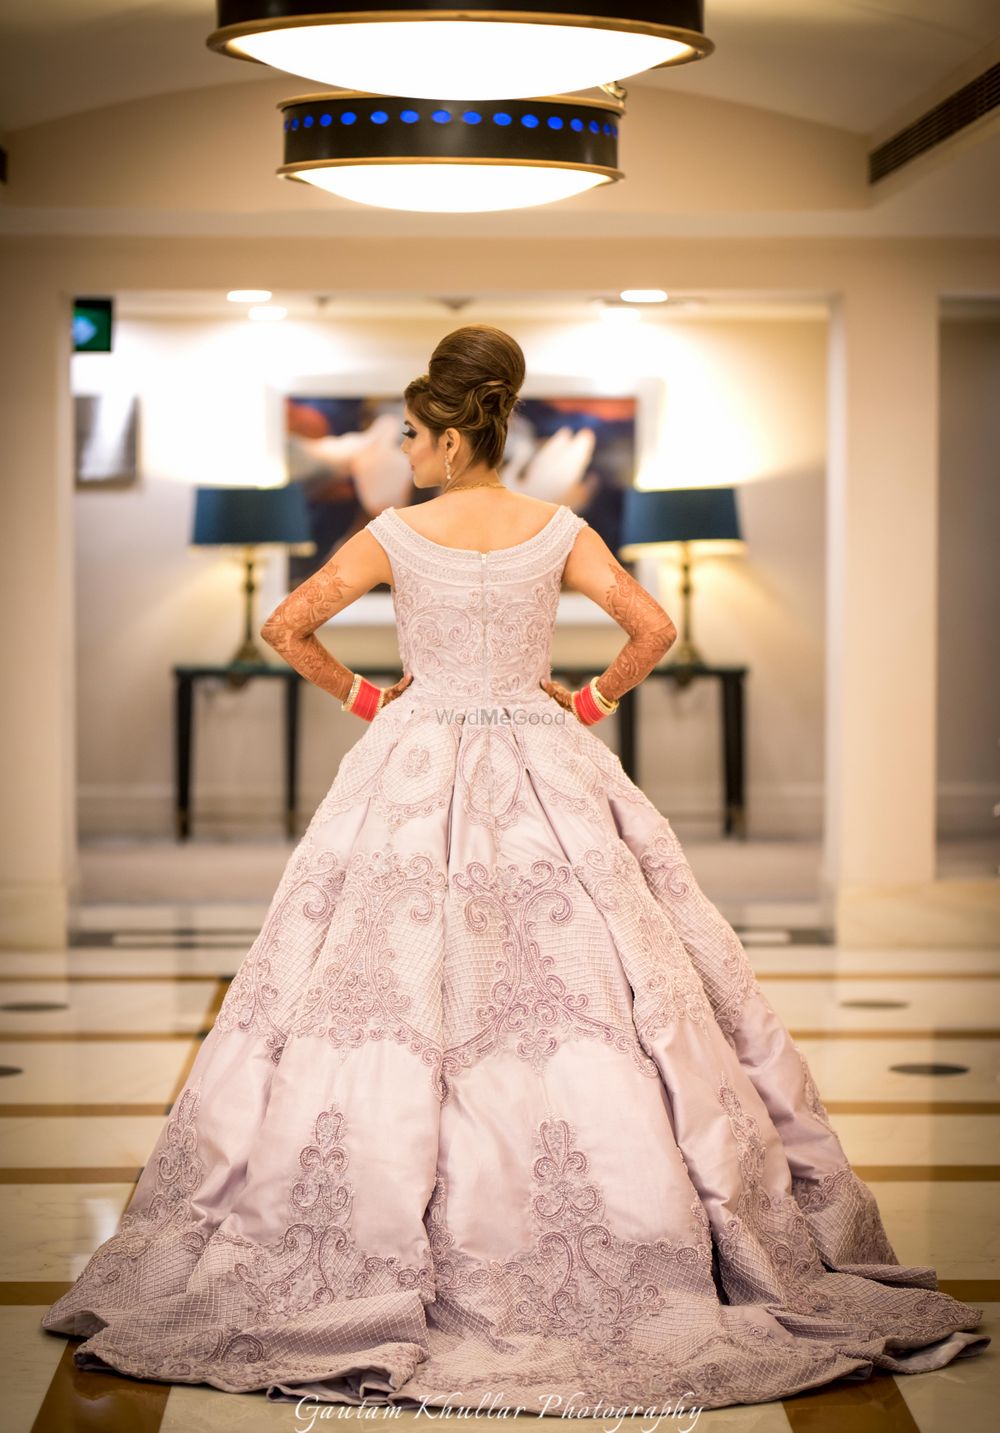 Photo of Lavender engagement gown